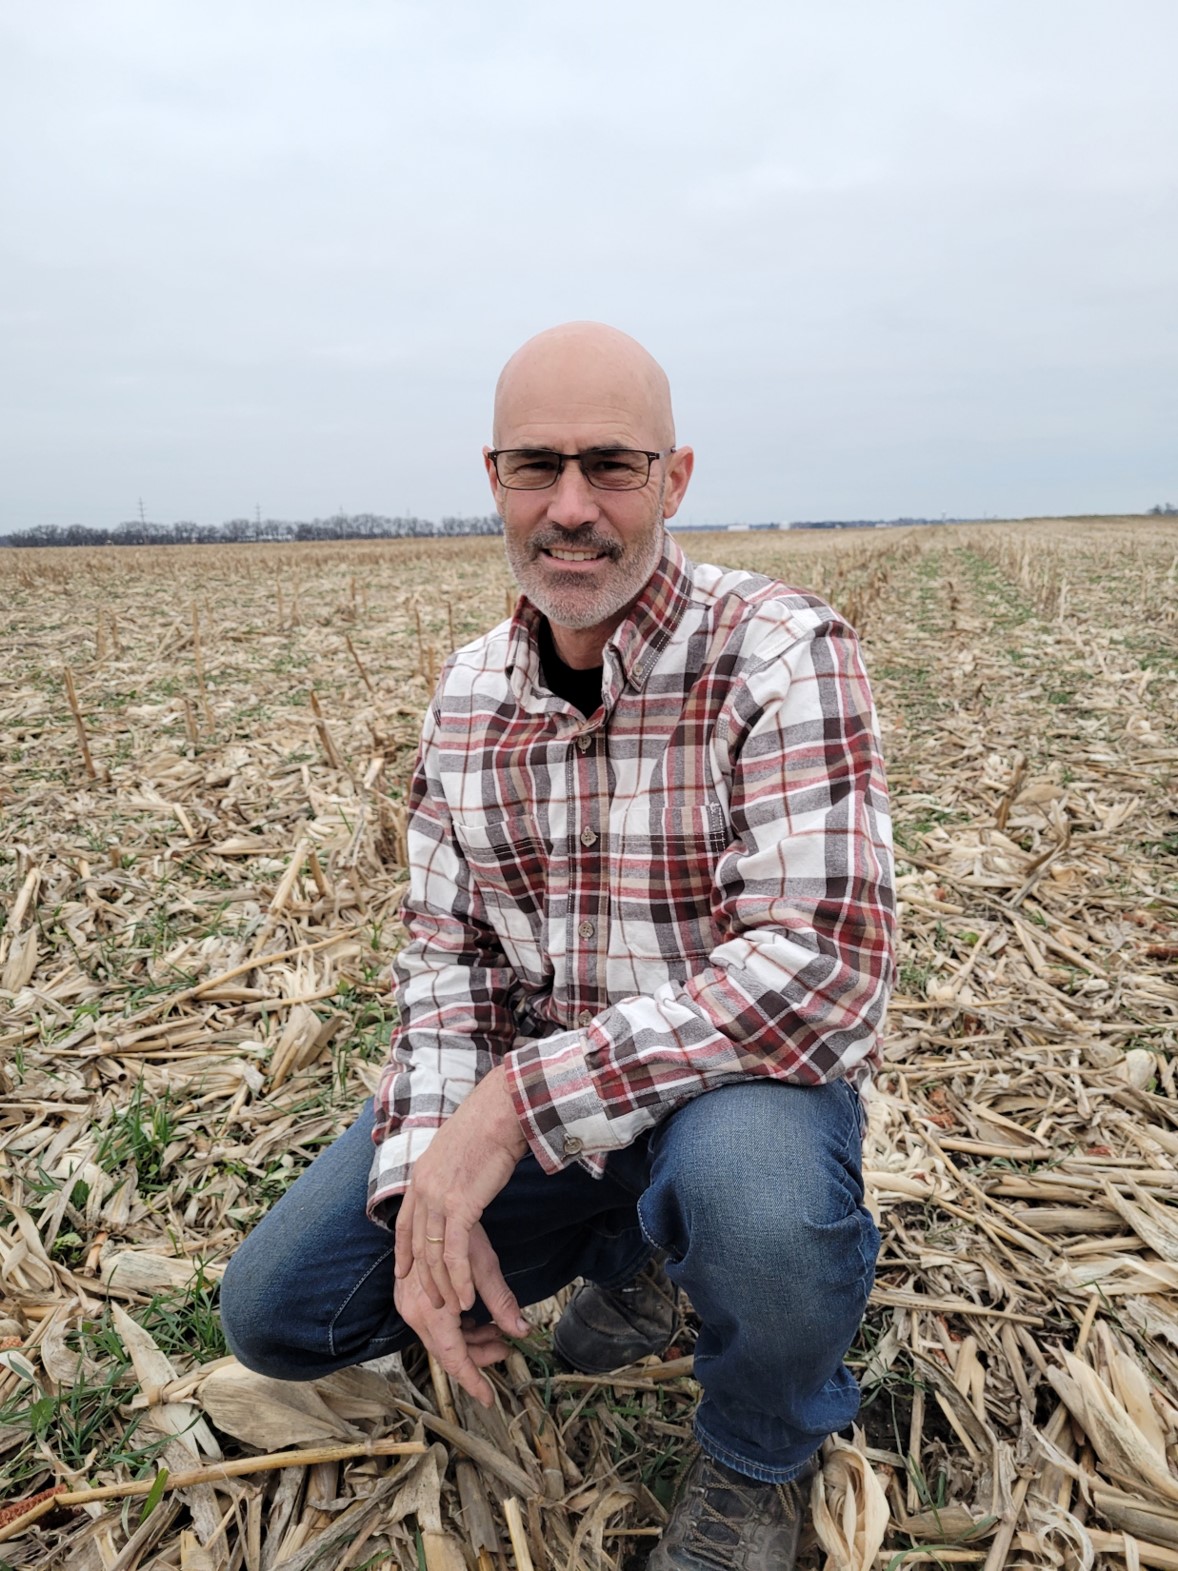 Man squating in field of cover crops